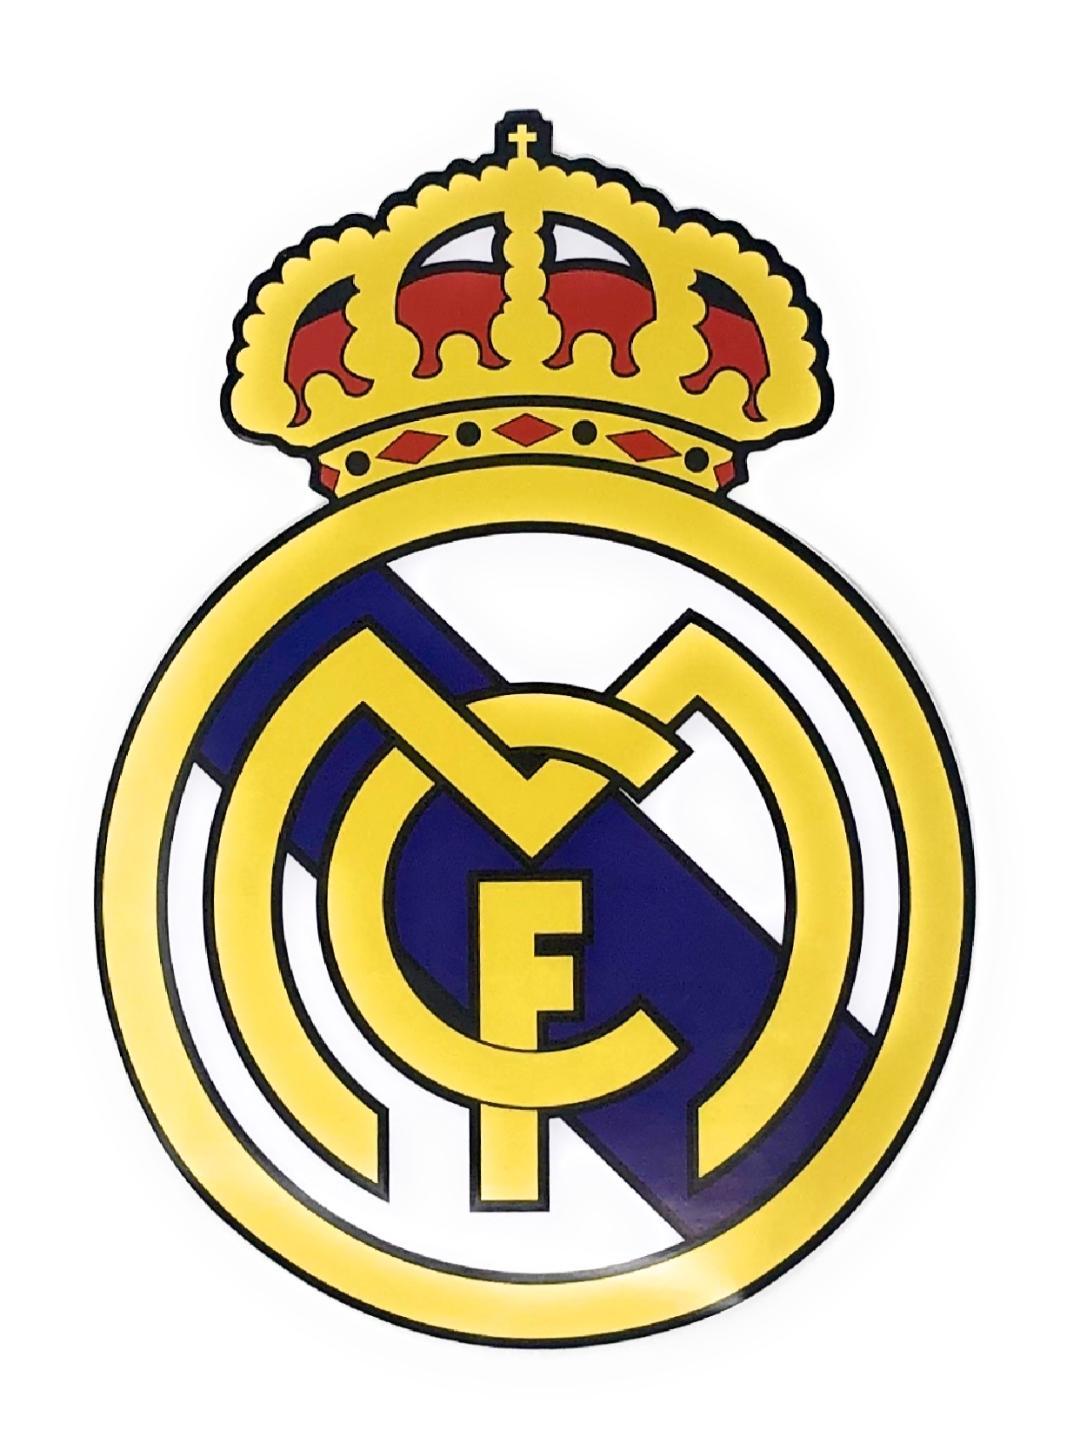 8*6 Real Madrid Peel Off Sticker Individual<br/>Quantity Available:50 pcs 